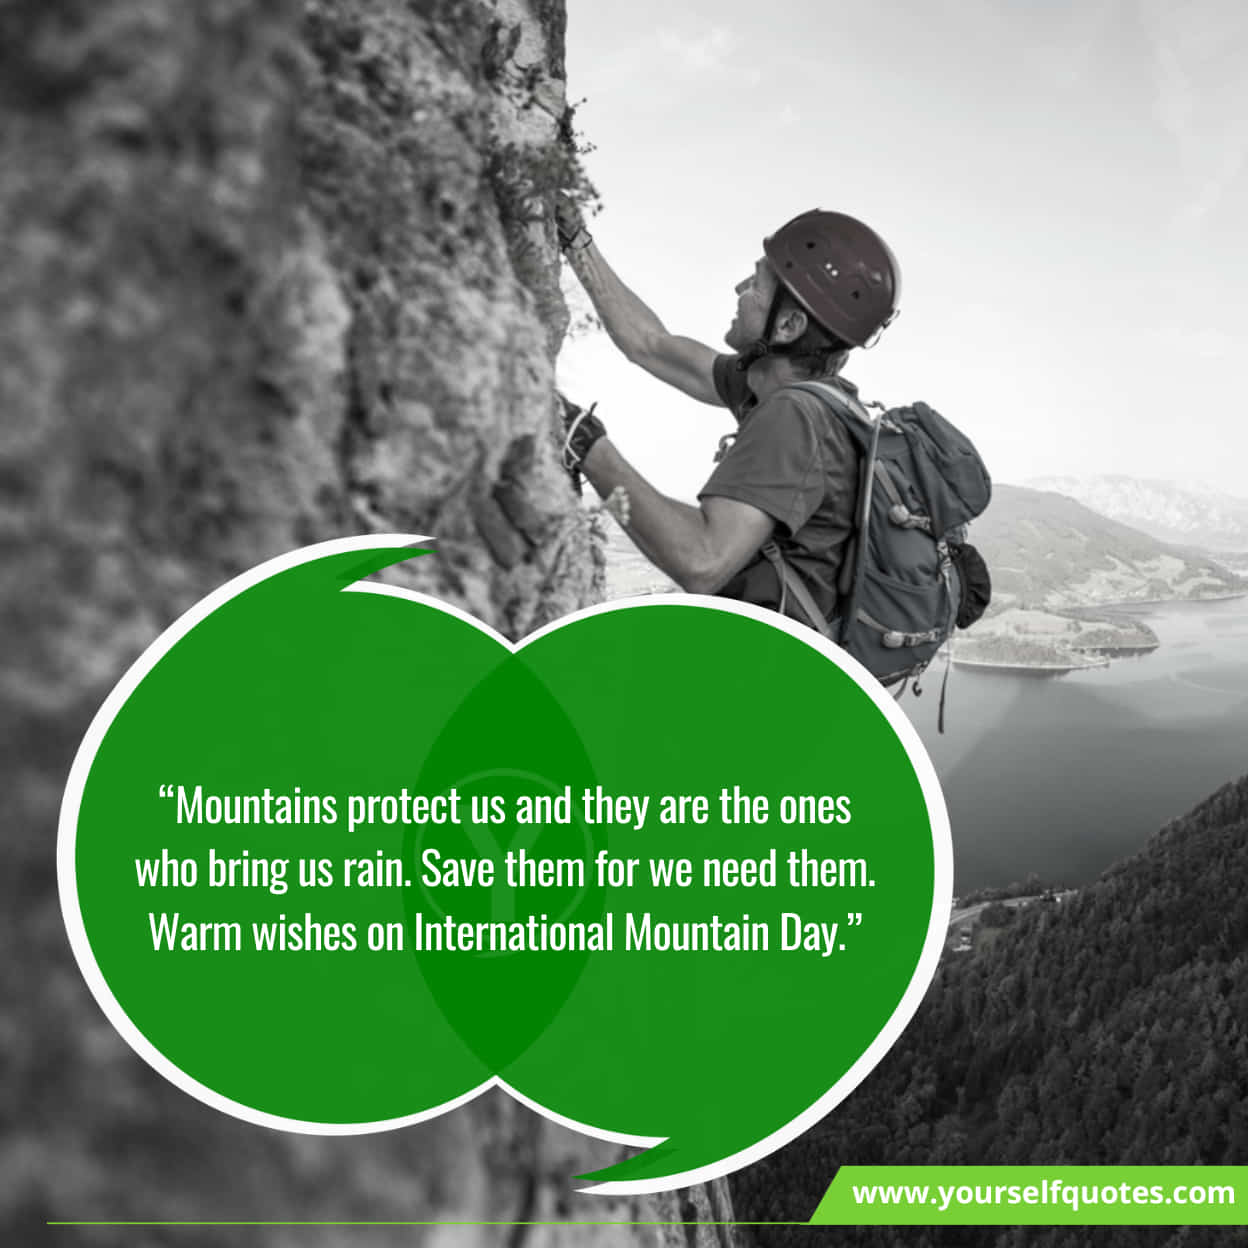 International Mountain Day Wishes